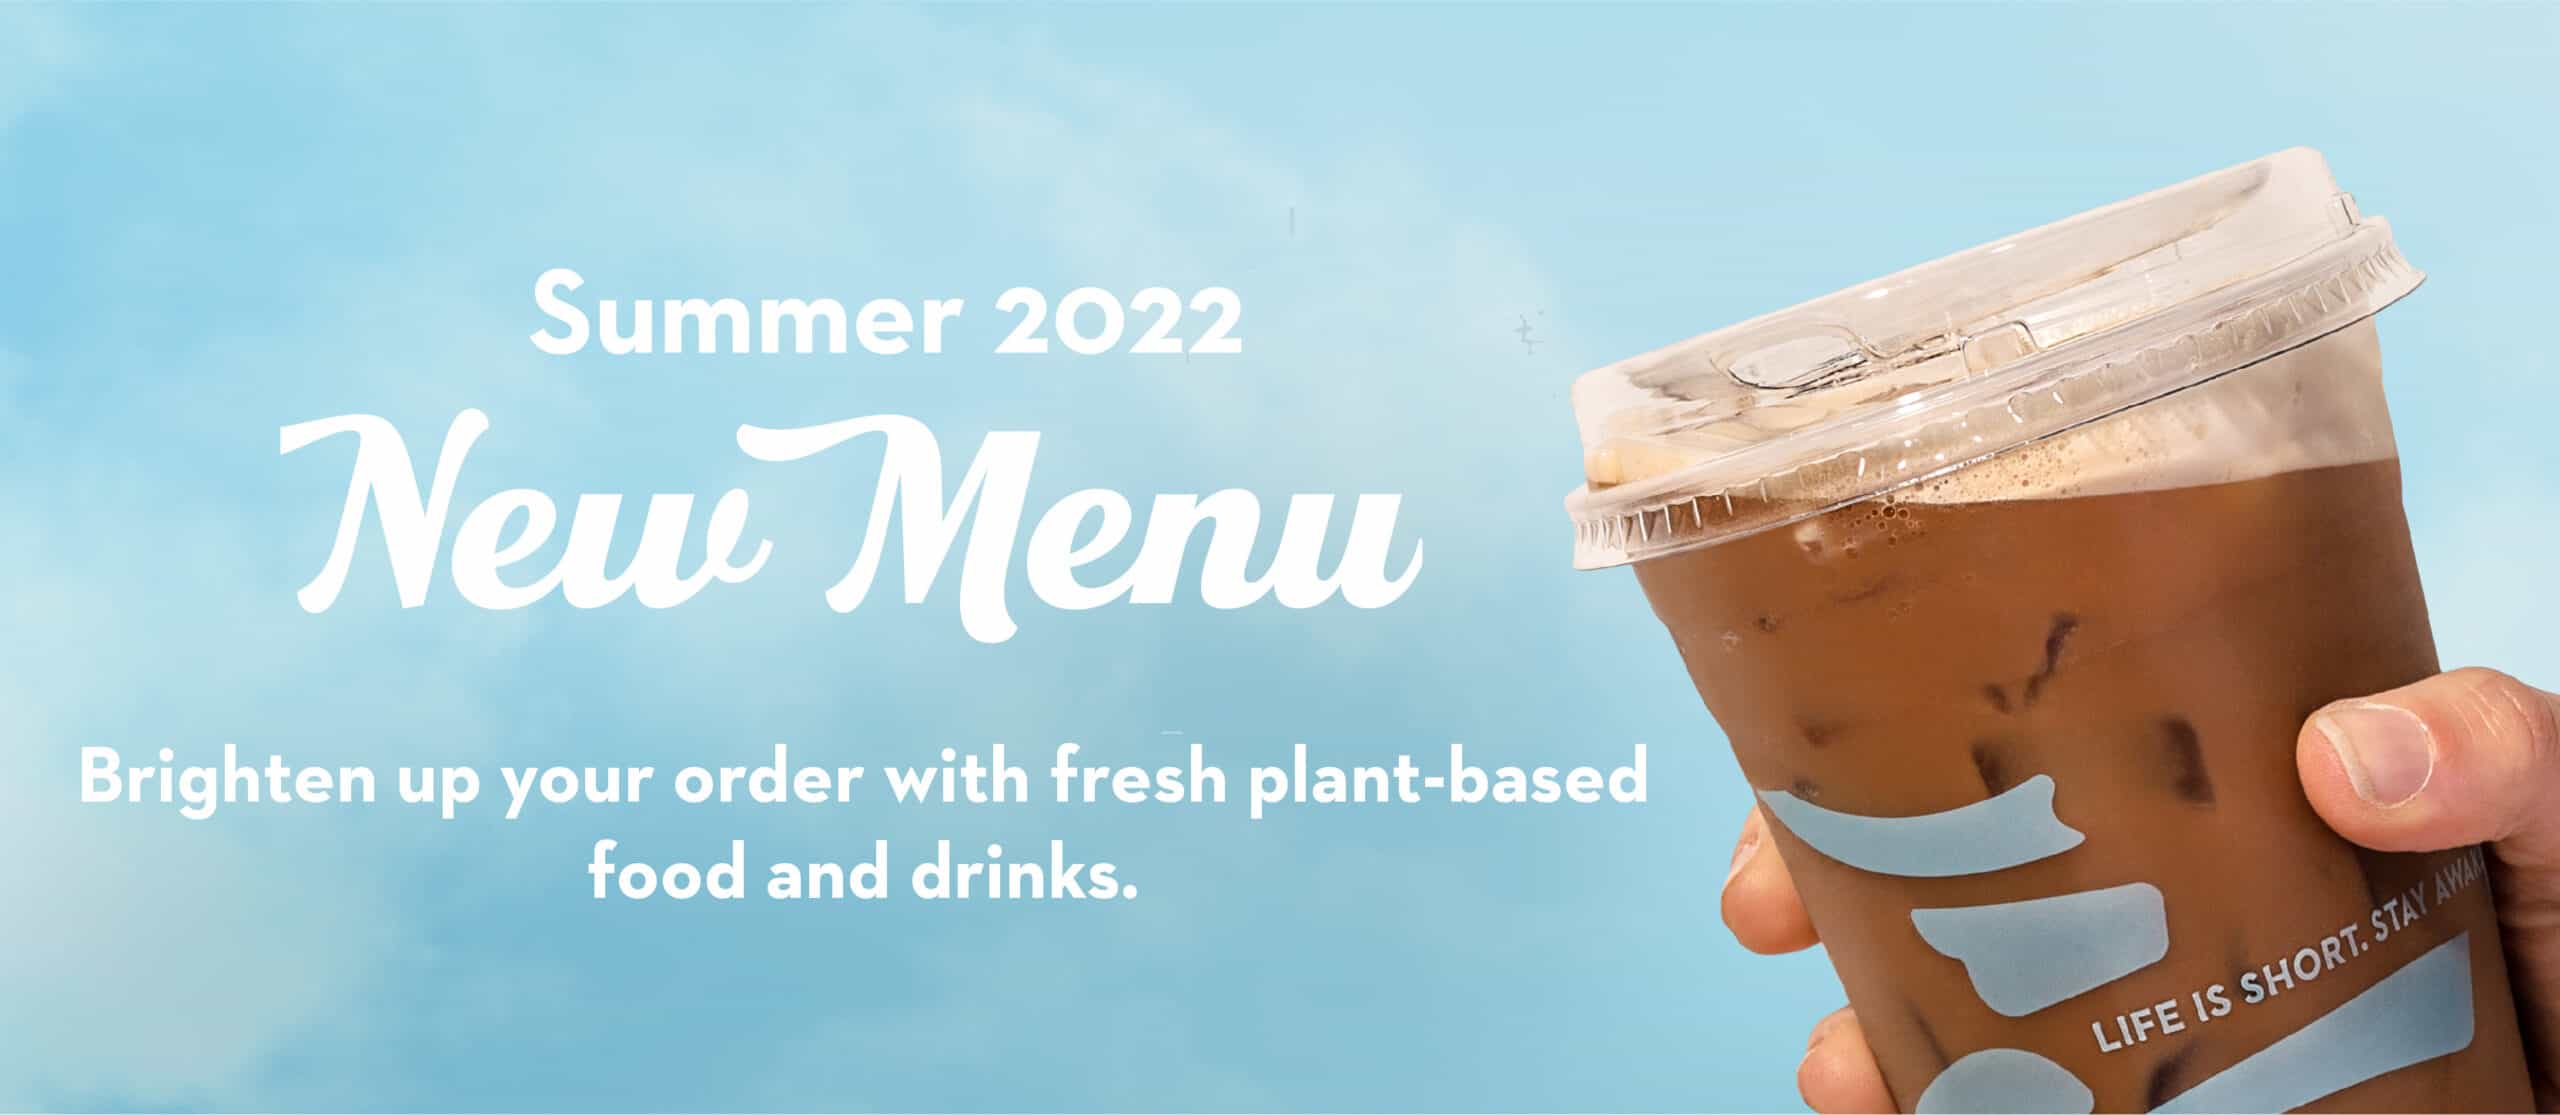 Summer 2022 New Menu. Brighten up your order with fresh plant-based food and drinks